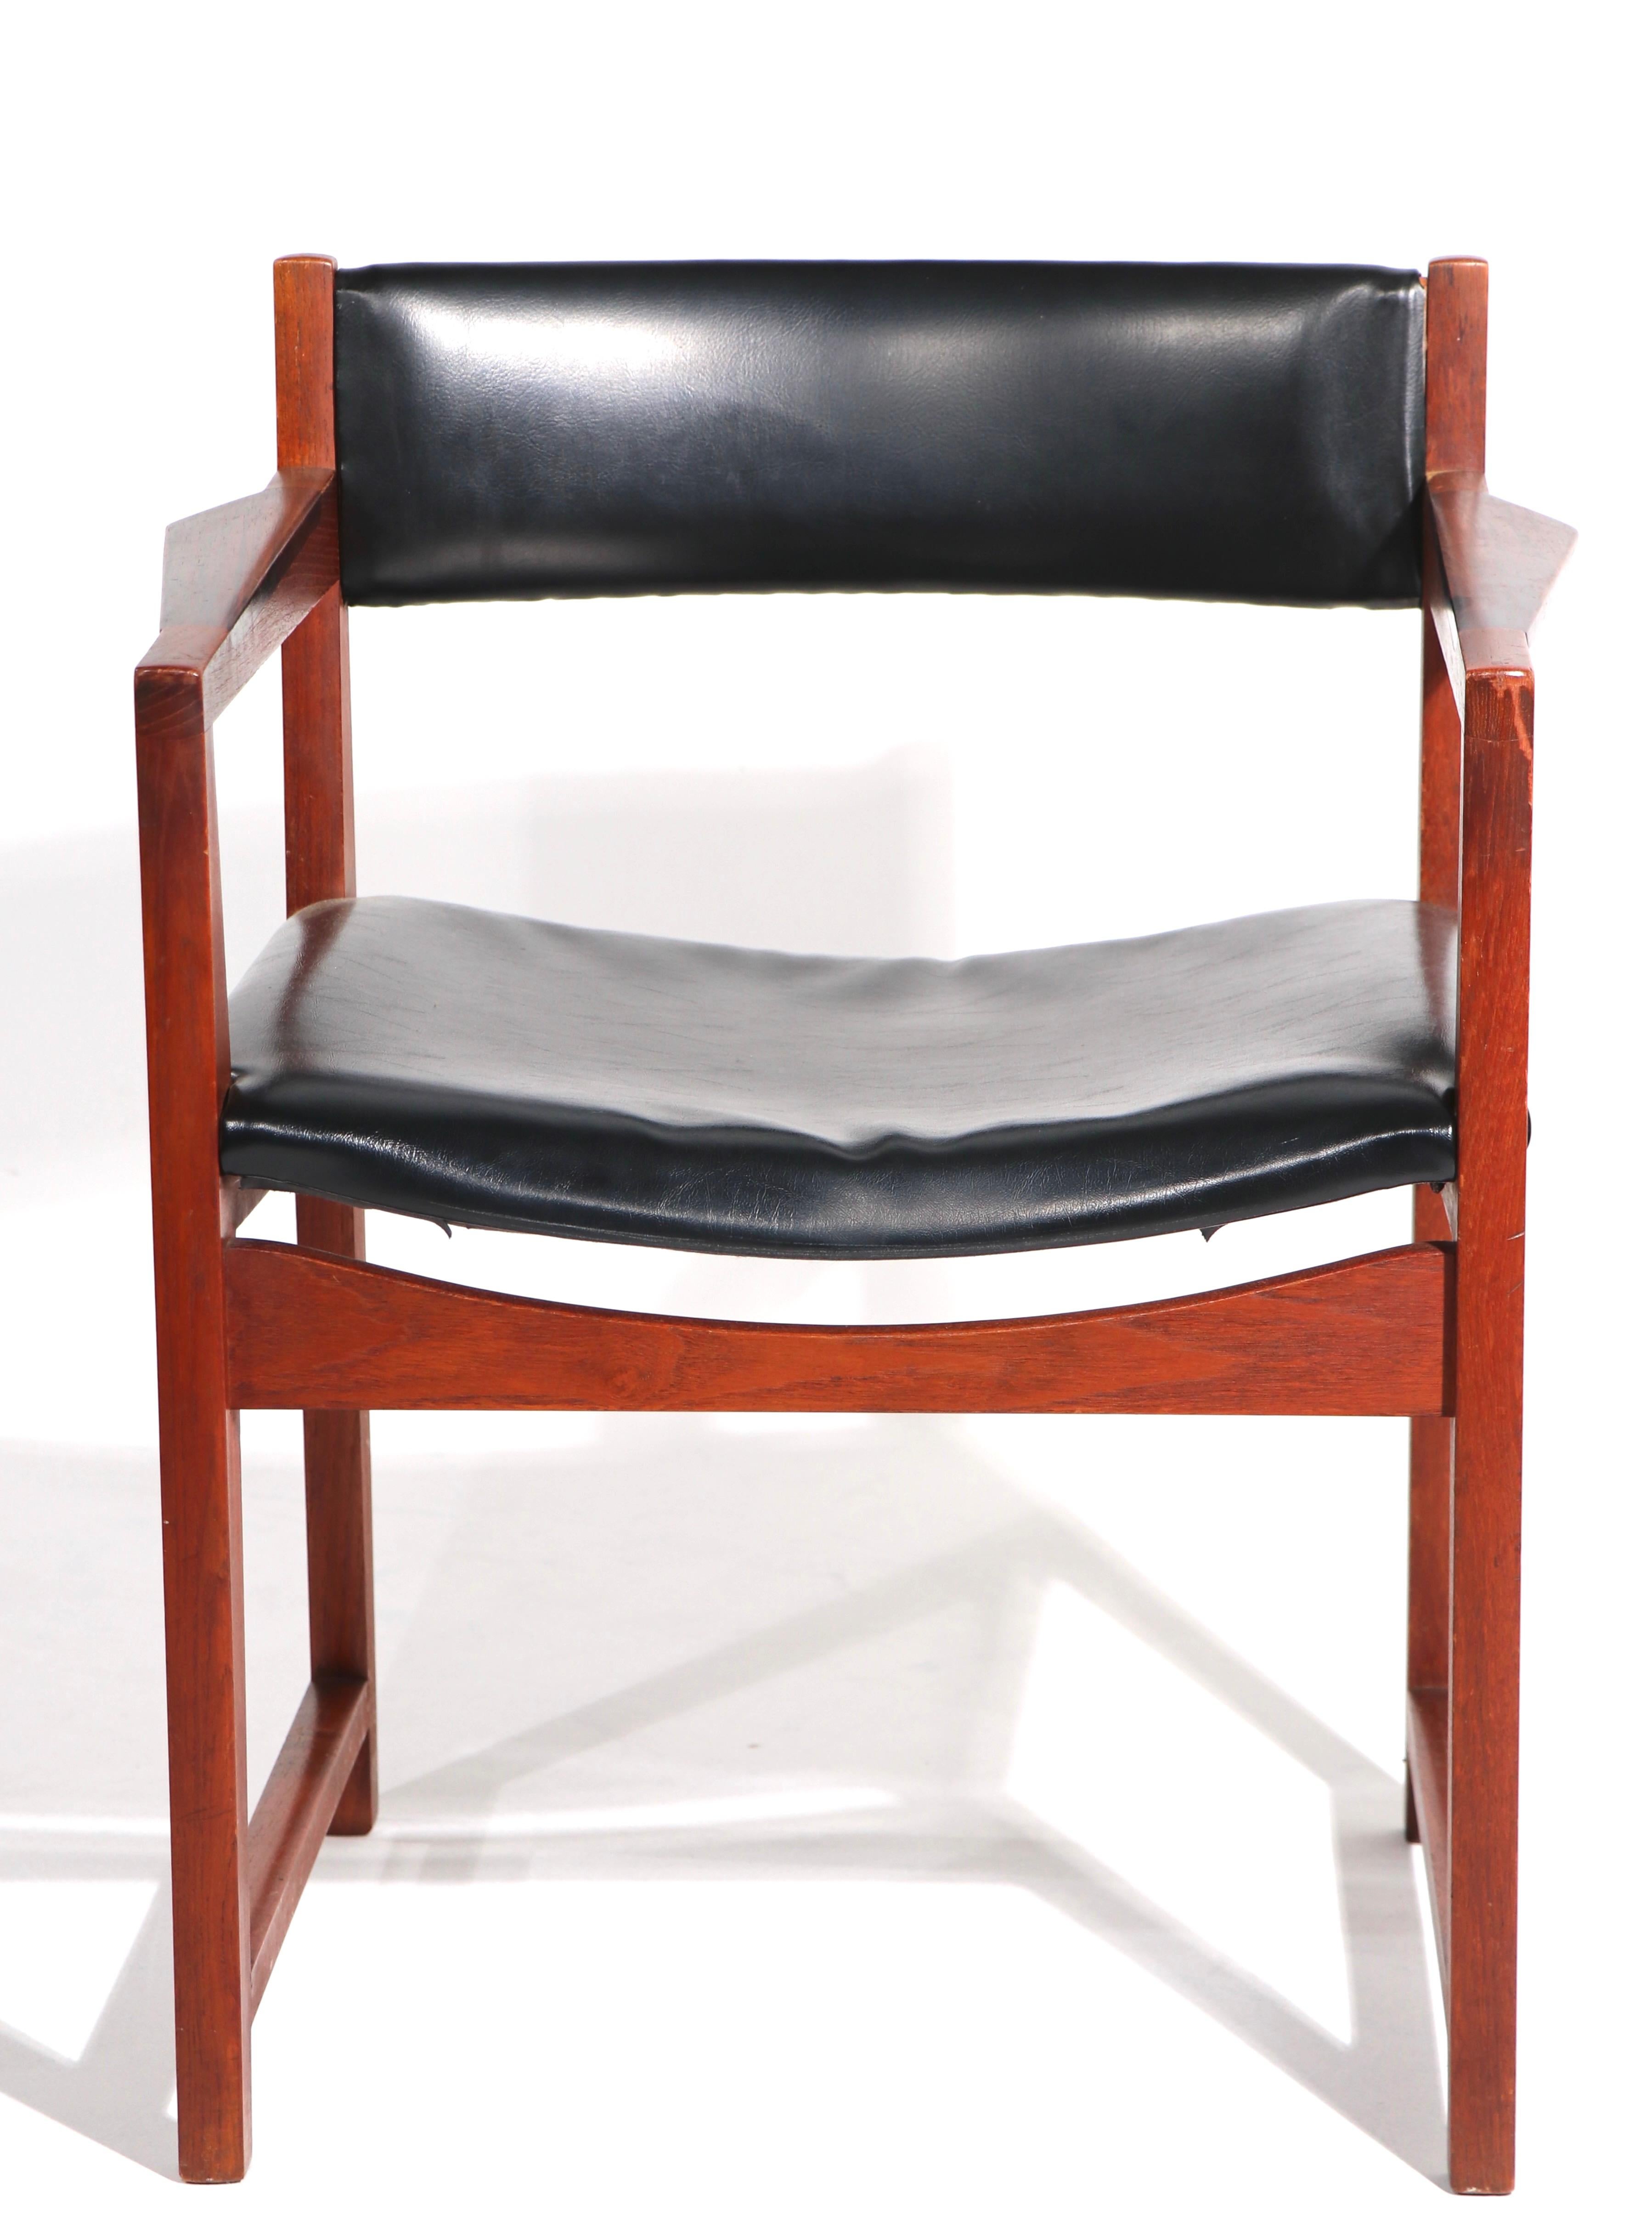 Set 6 Danish Dining Chairs by Peter Hvidt & Orla Molgaard for Soborg Mobelfabrik In Good Condition For Sale In New York, NY